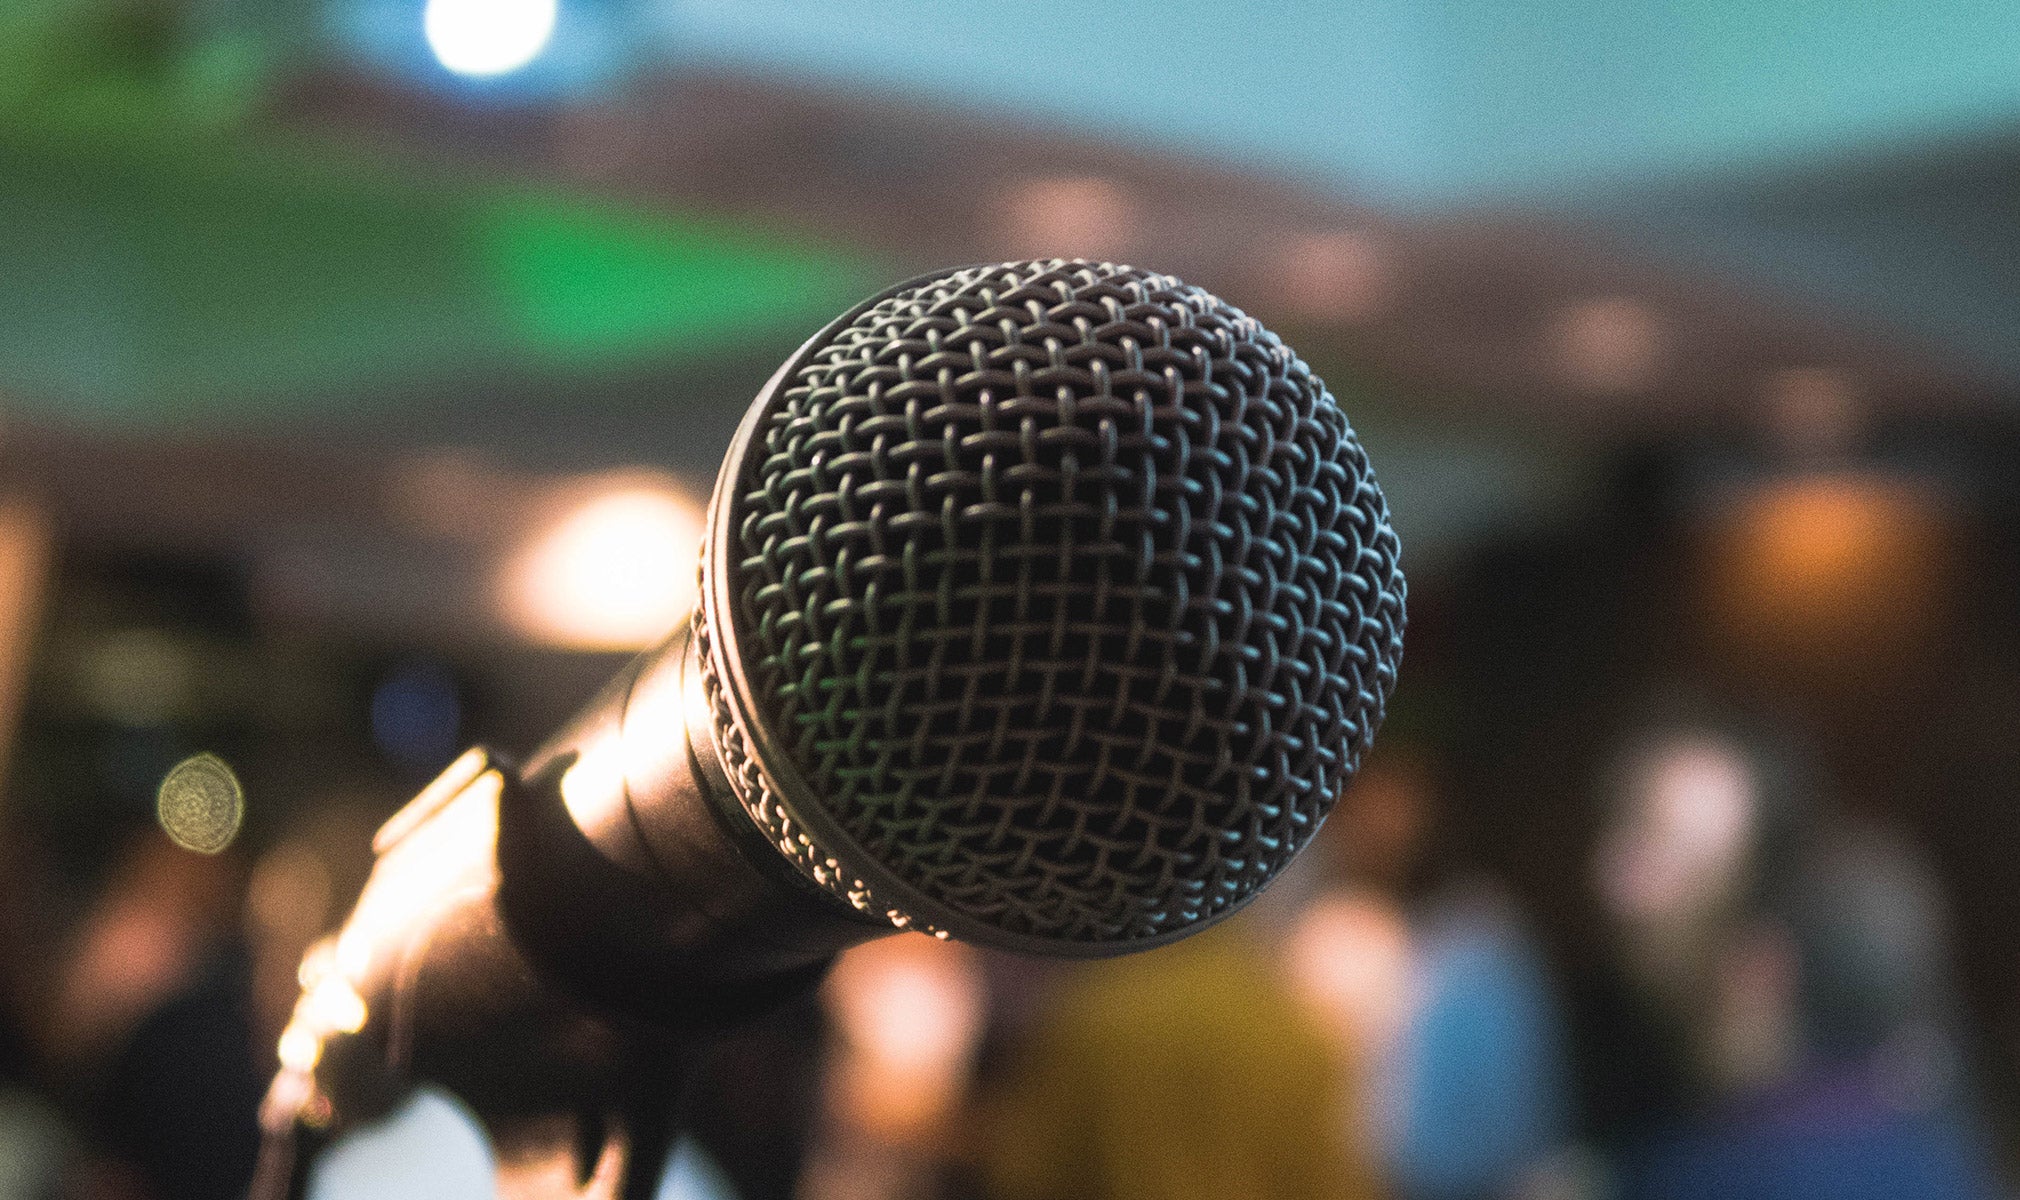 Does CBD Help With Public Speaking?